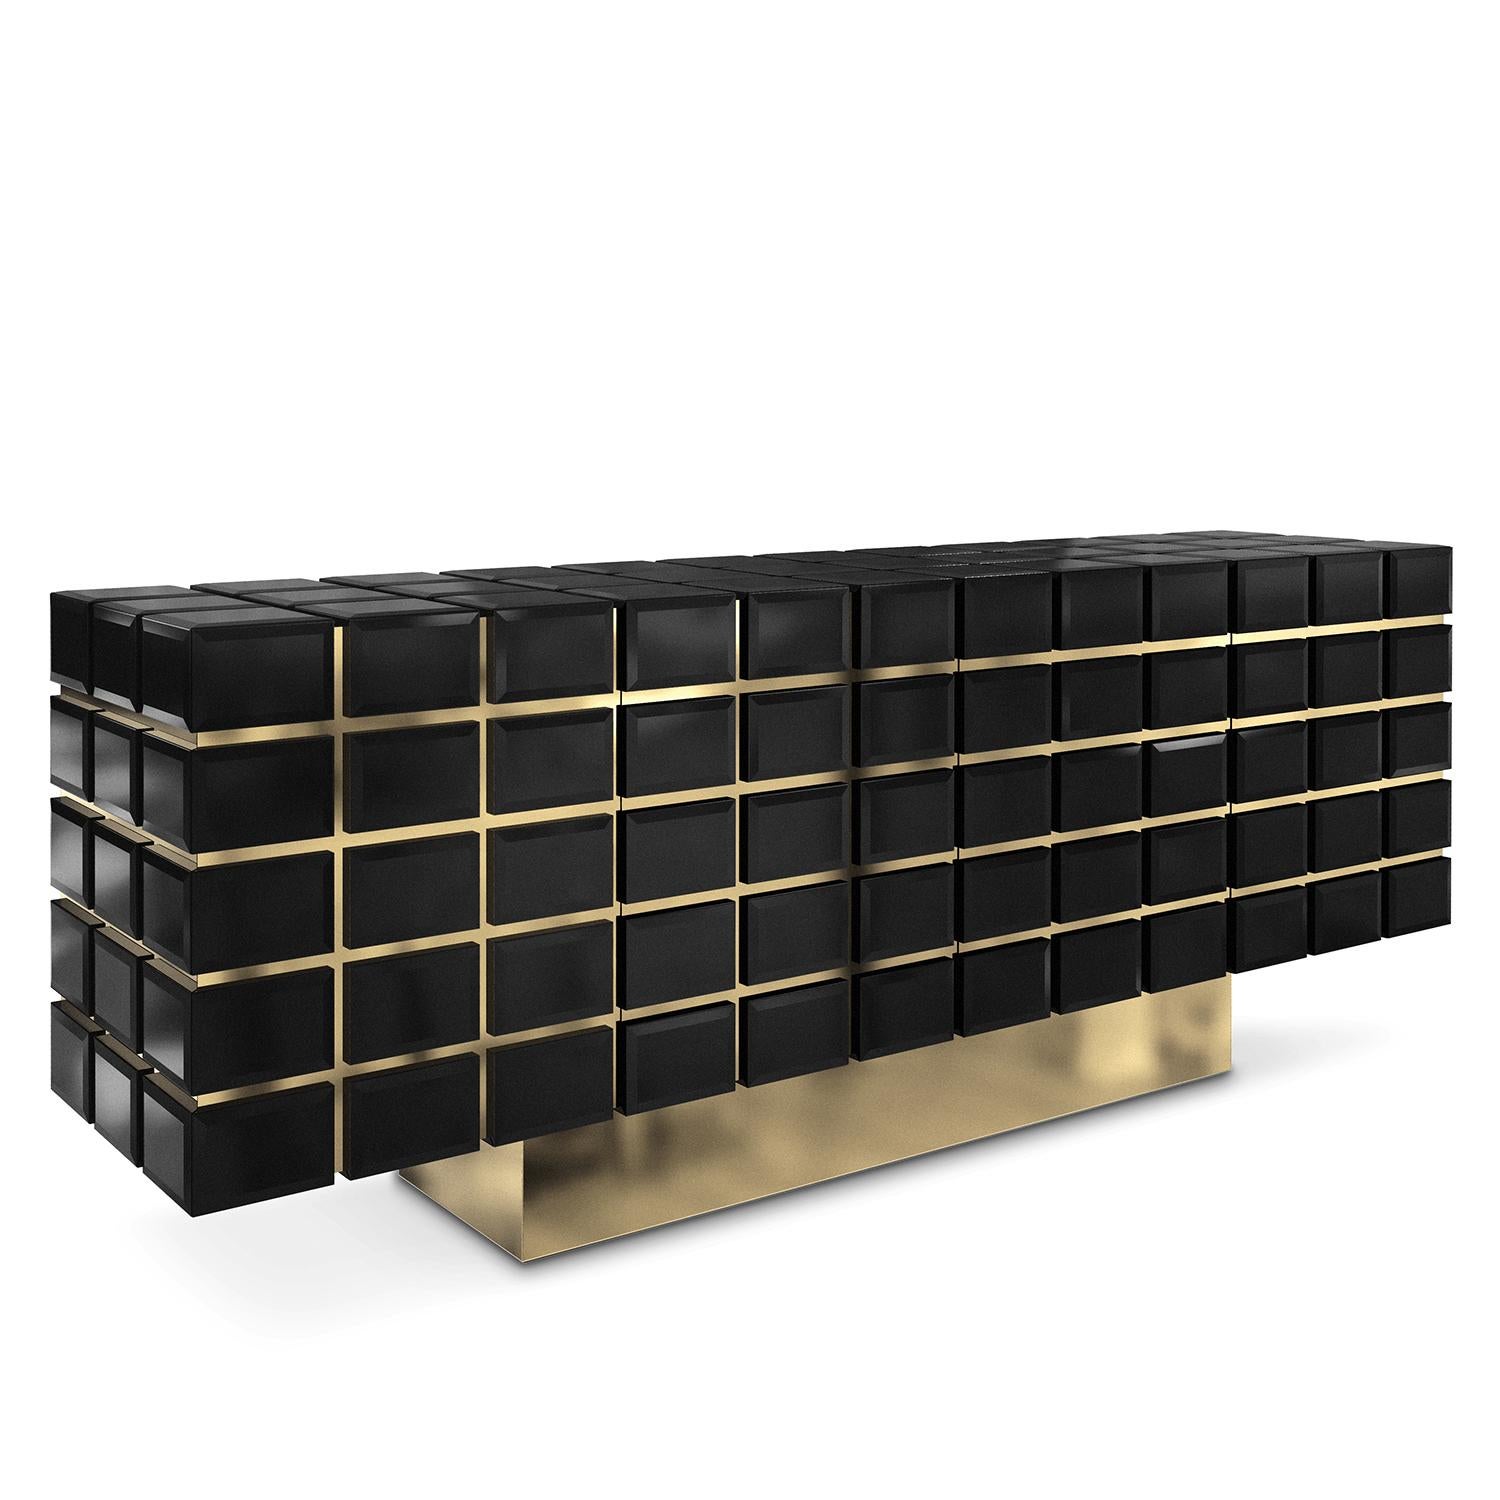 Sideboard Williams with solid wood structure with squares black
glass parts, with solid brass body in polished finish.
With 4 doors, inside made in black mirror glass, each including 2
black glass shelves and a drawer in walnut root veneer